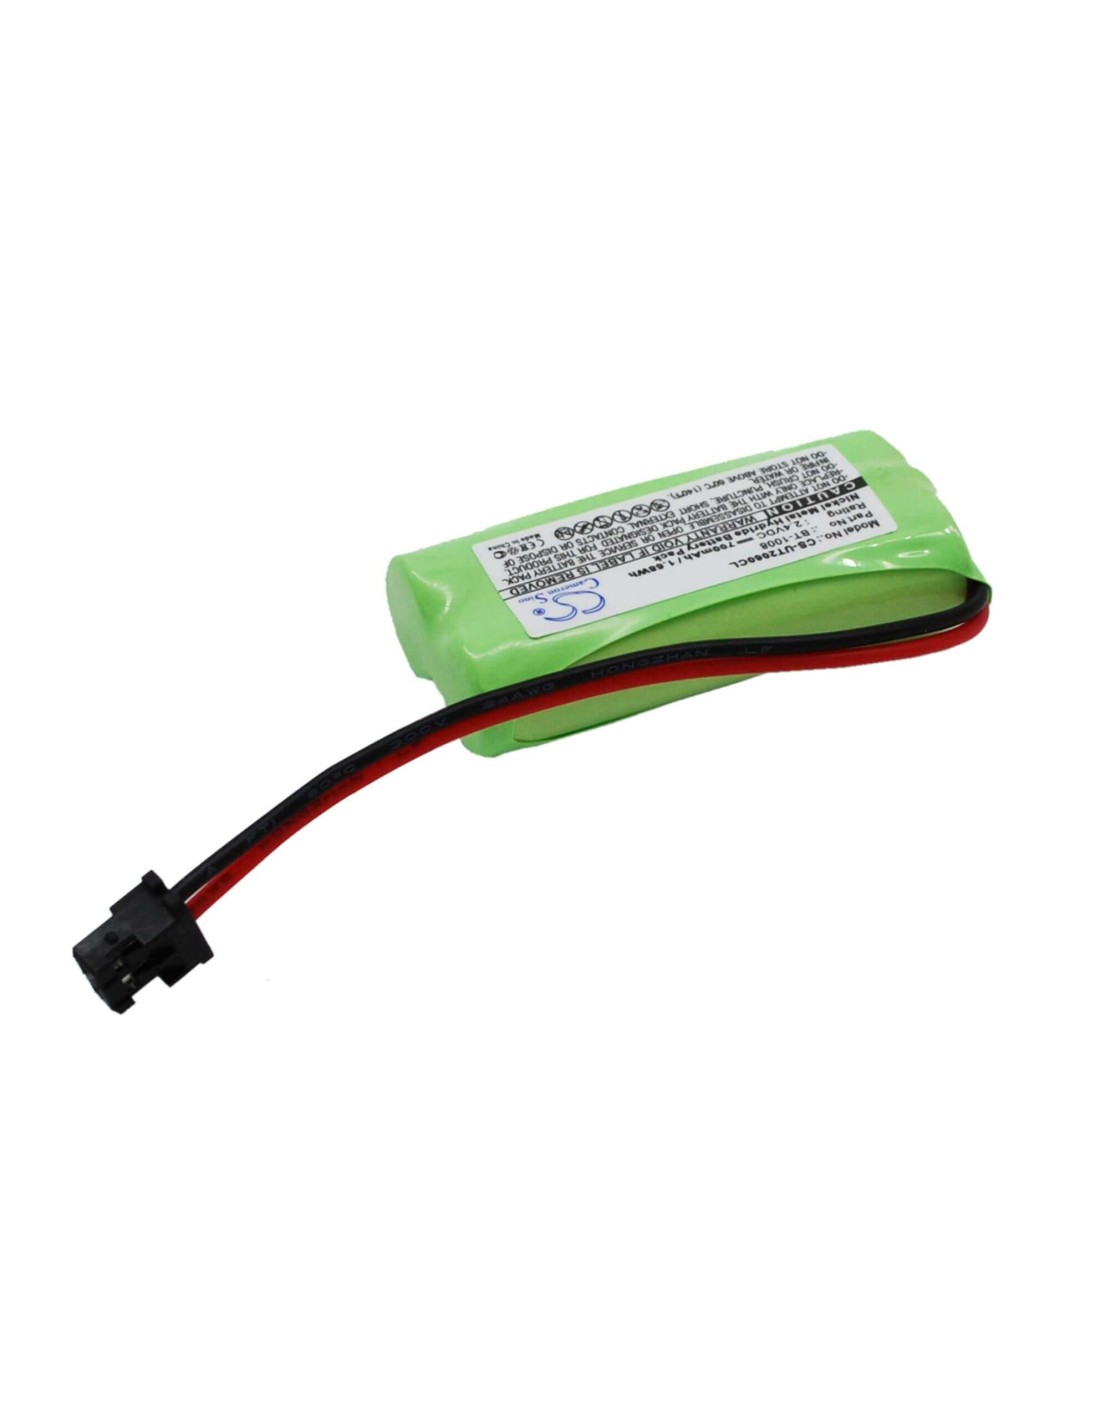 Battery for Toshiba, Dect 2060, Dect 2080 2.4V, 700mAh - 1.68Wh